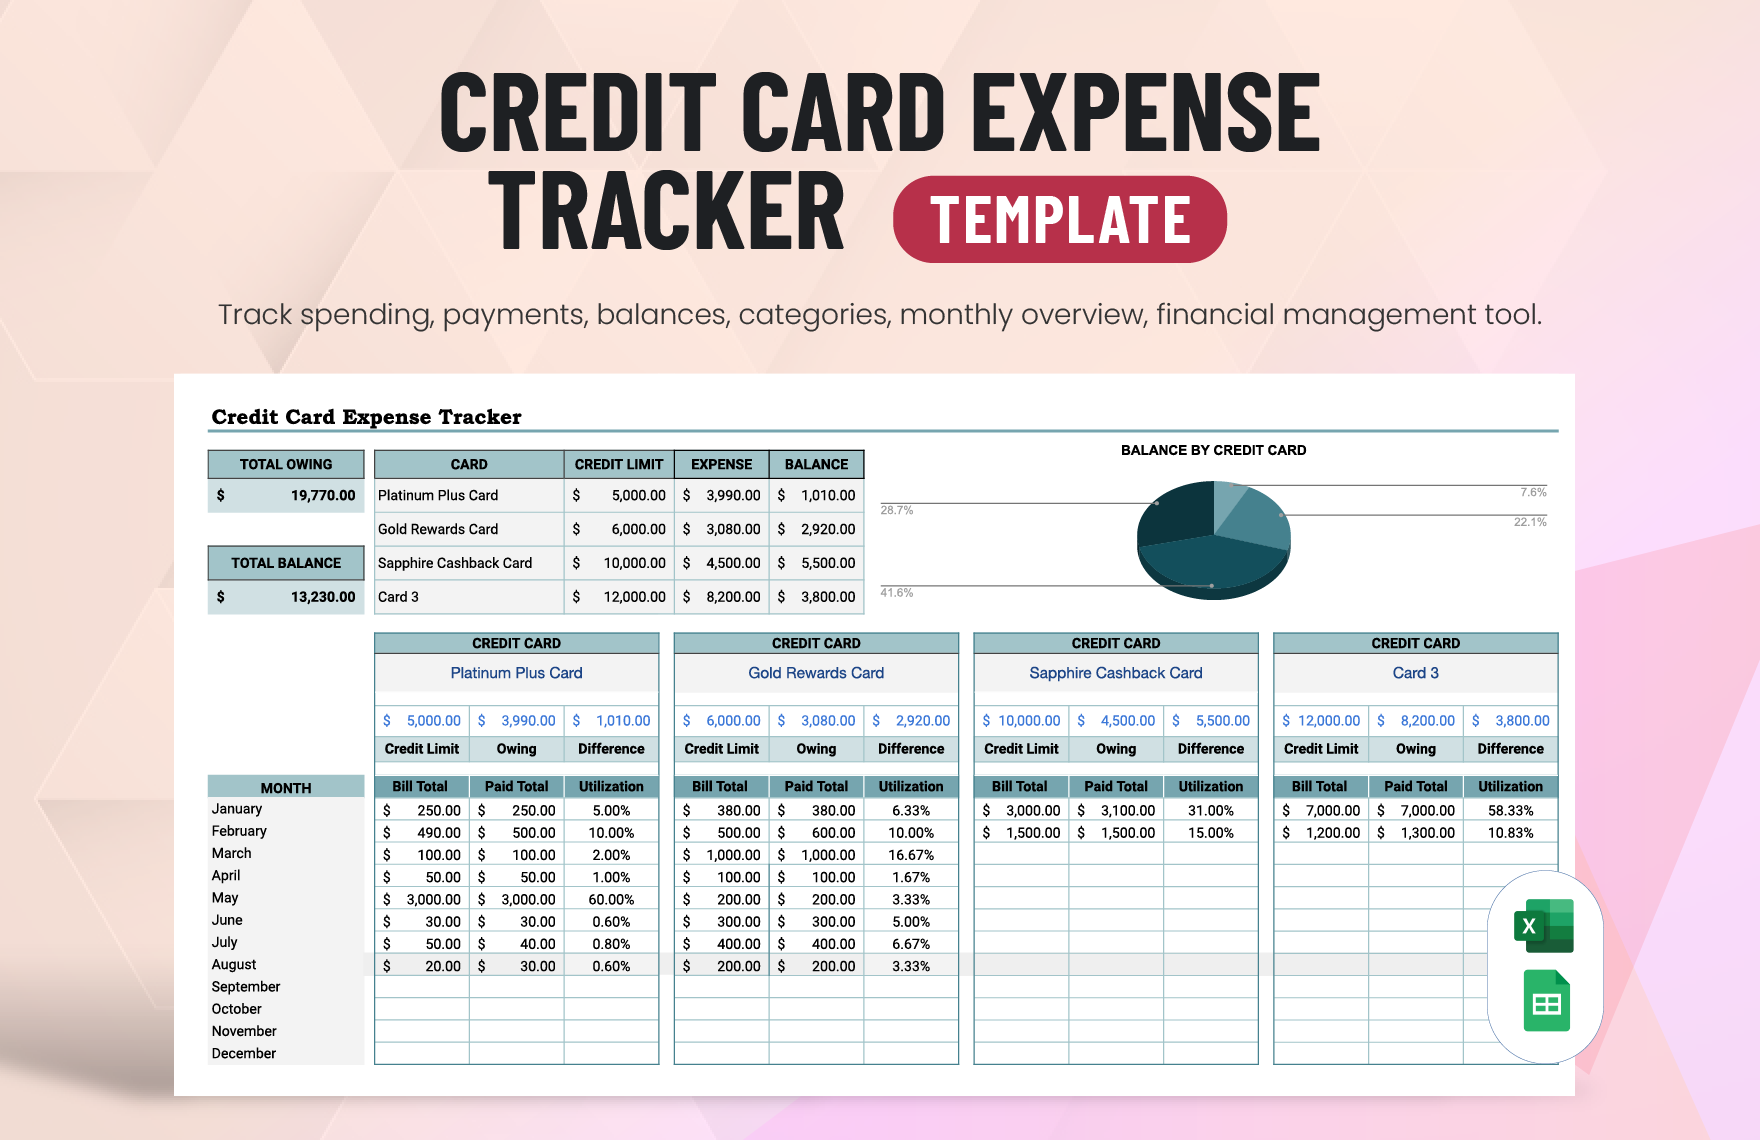 Credit Card Expense Tracker Template in Excel, Google Sheets